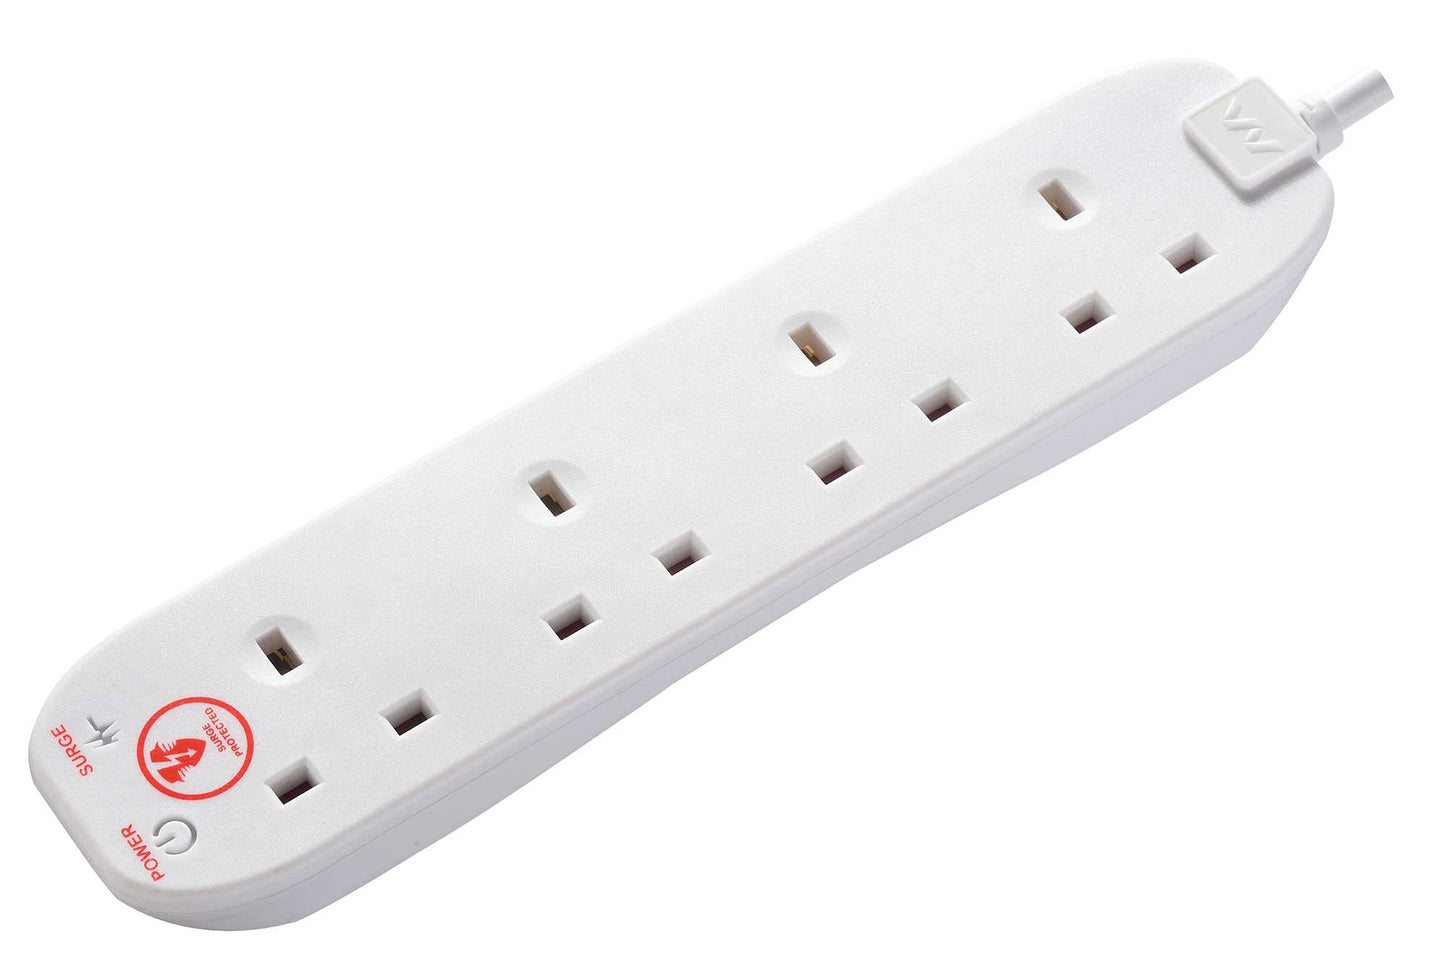 Masterplug 4m 4-Socket 13A Surge Protected Extension Lead - White - maplin.co.uk